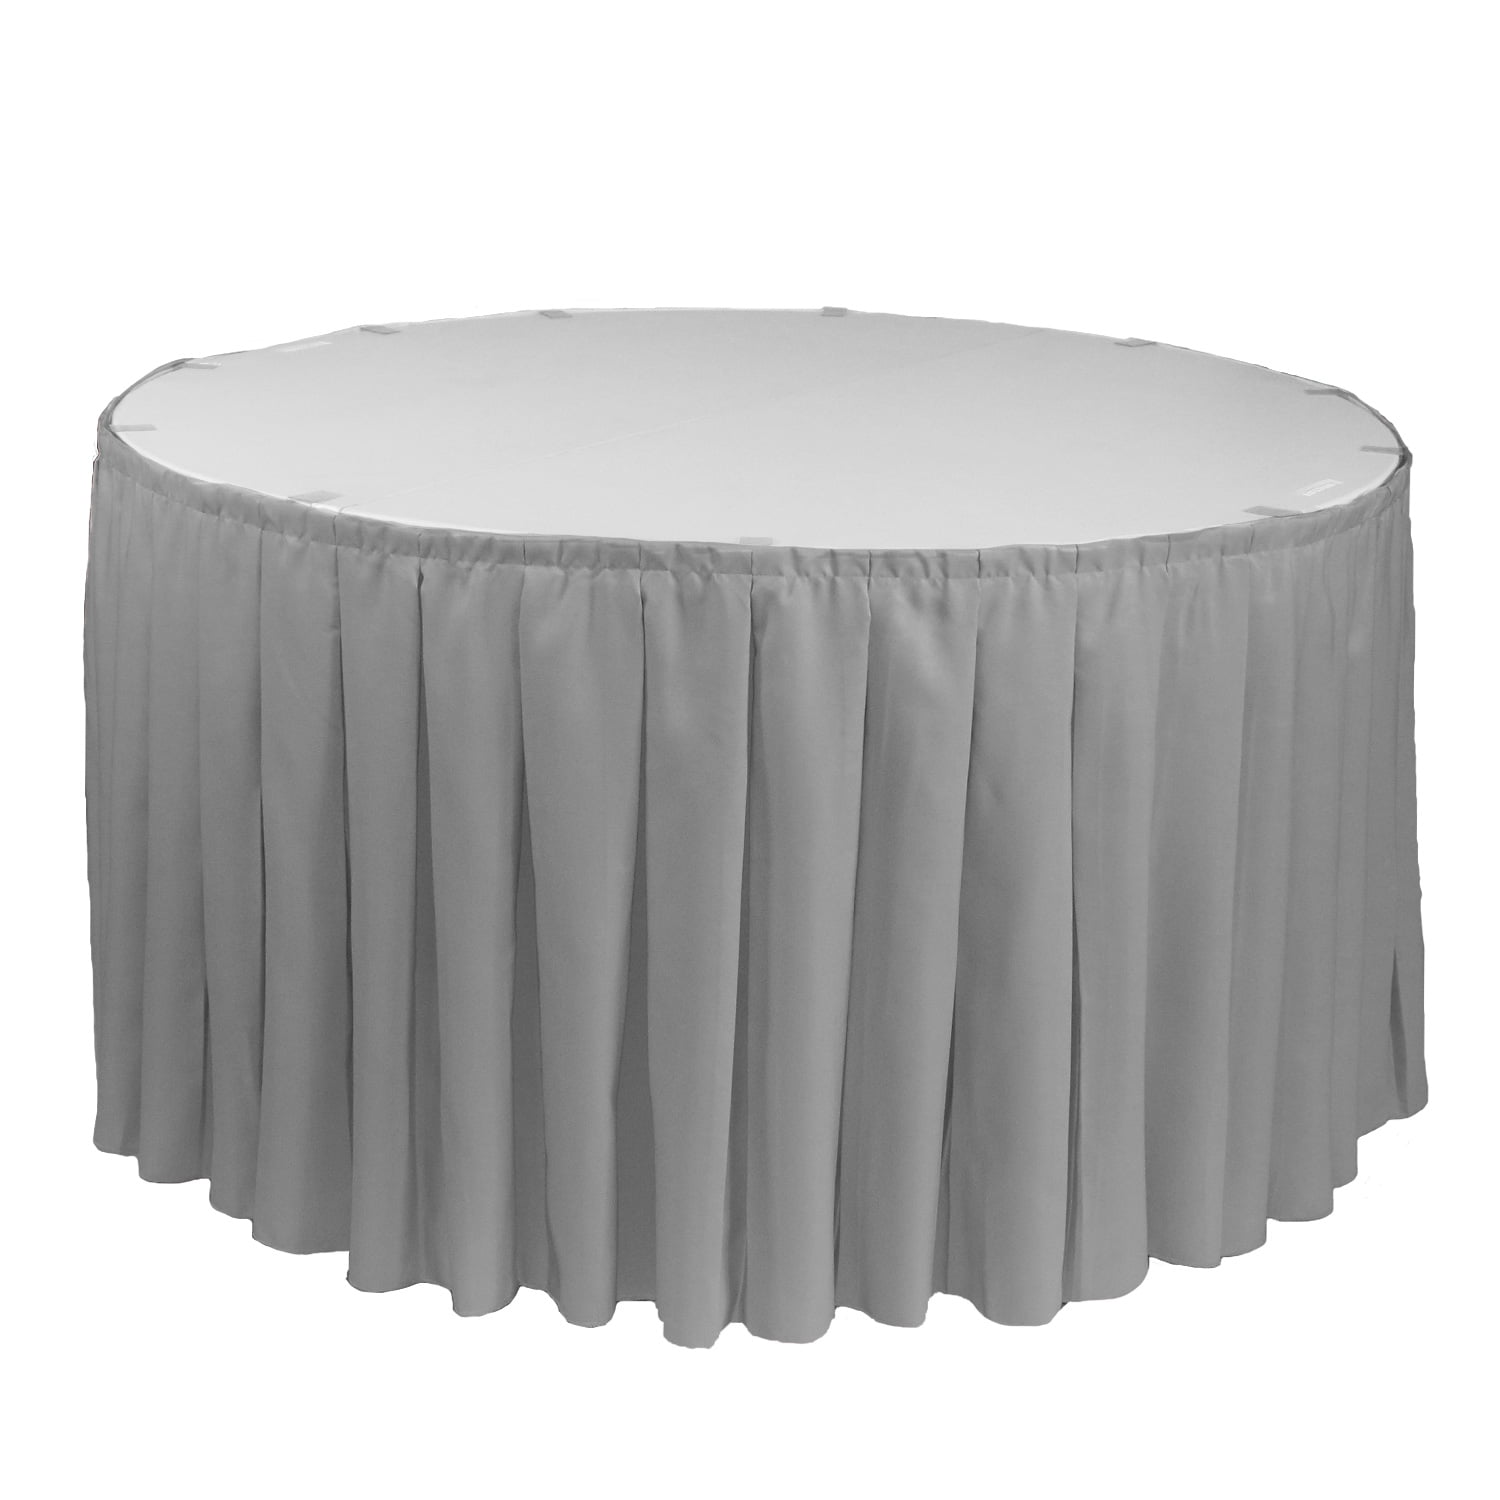 17 ft x 29 inch Polyester Pleated Table Skirt Black For 6 ft Rectangular Tables Your Chair Covers